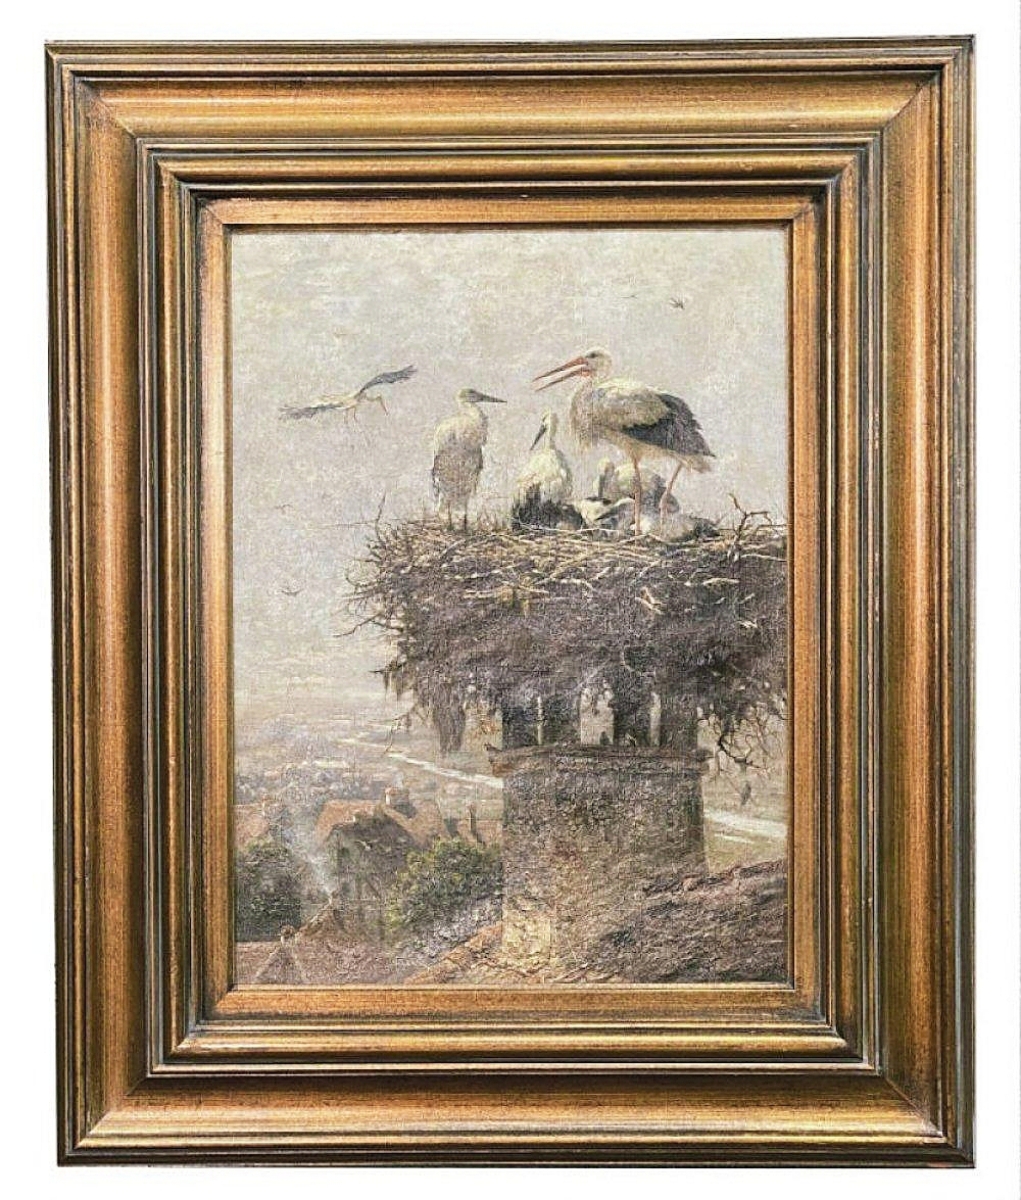 The local private collector who acquired “The Stork Nest” by Herman Hartwich thought it had a European aesthetic. It flew to $9,600 ($500-$1,500).